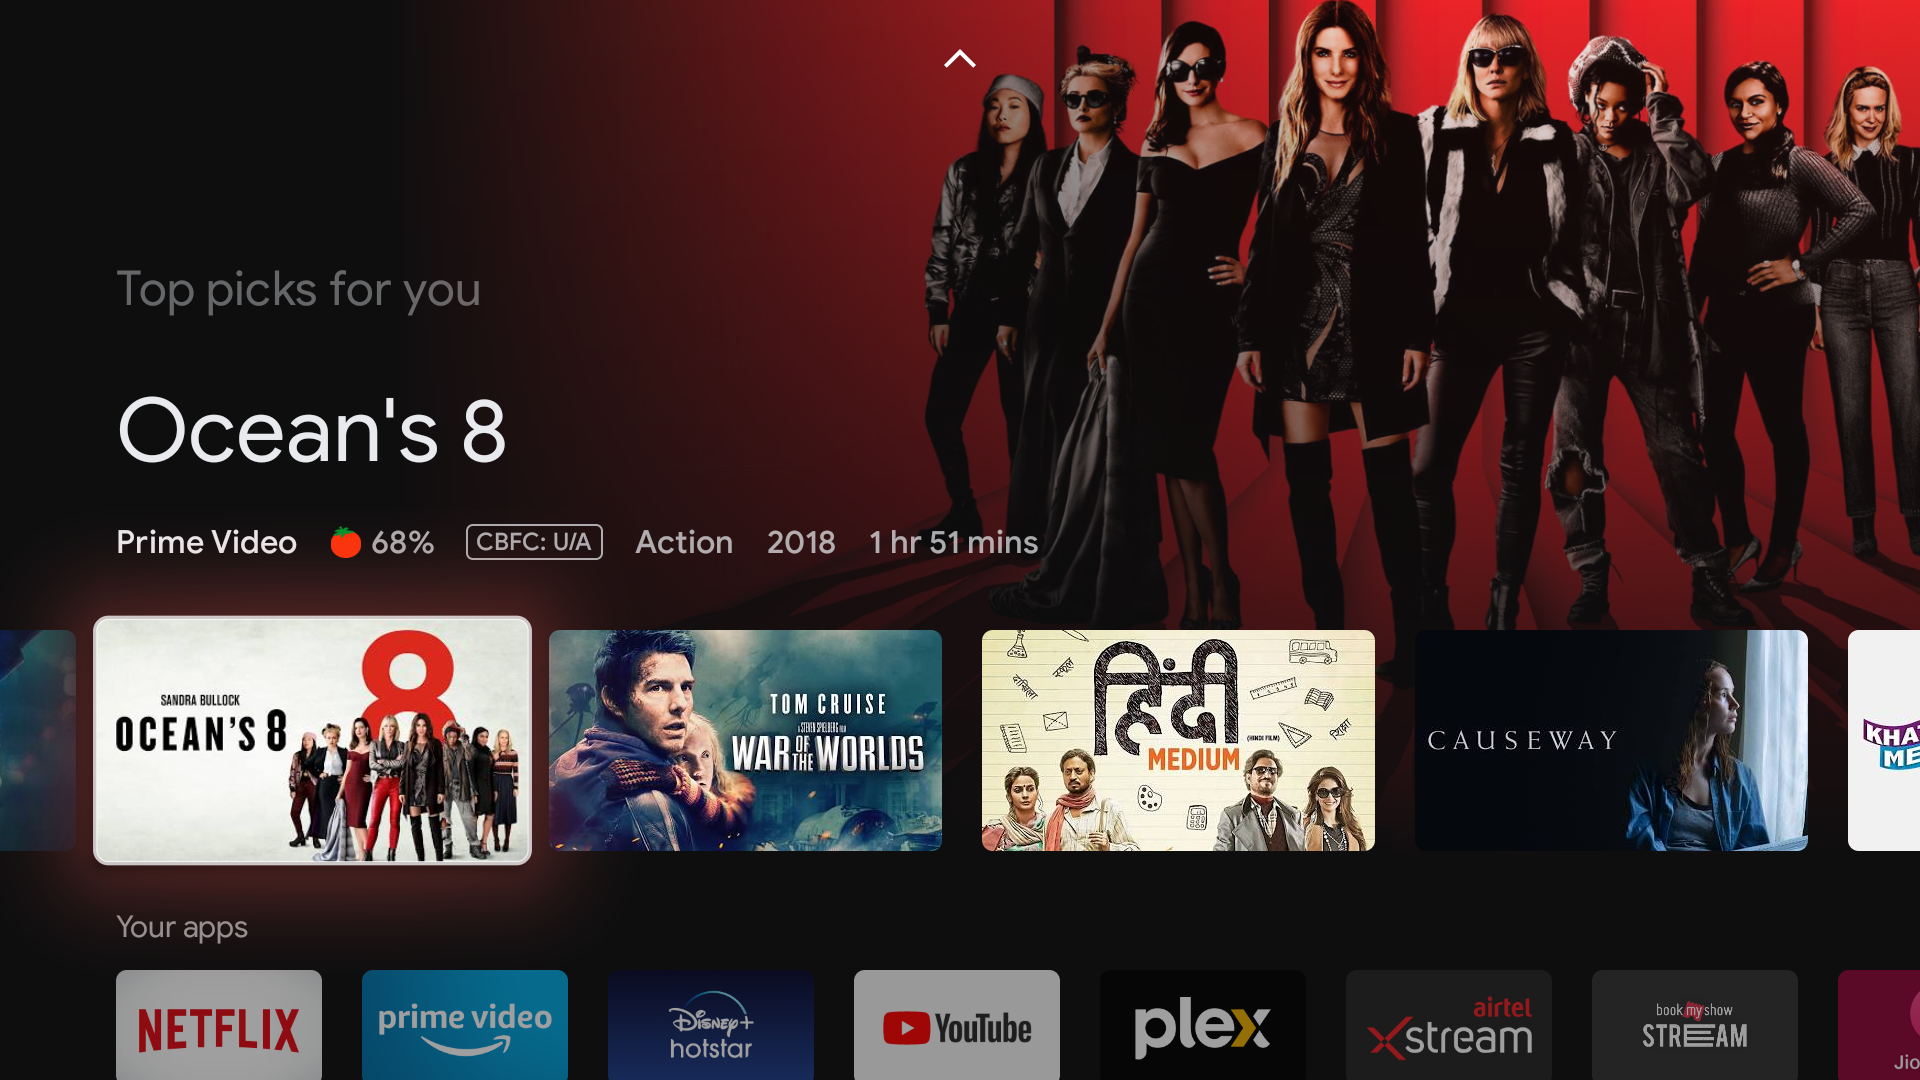 Google TV screen render showing Ocean's 8 key art and various other films and streaming platforms in a grid.